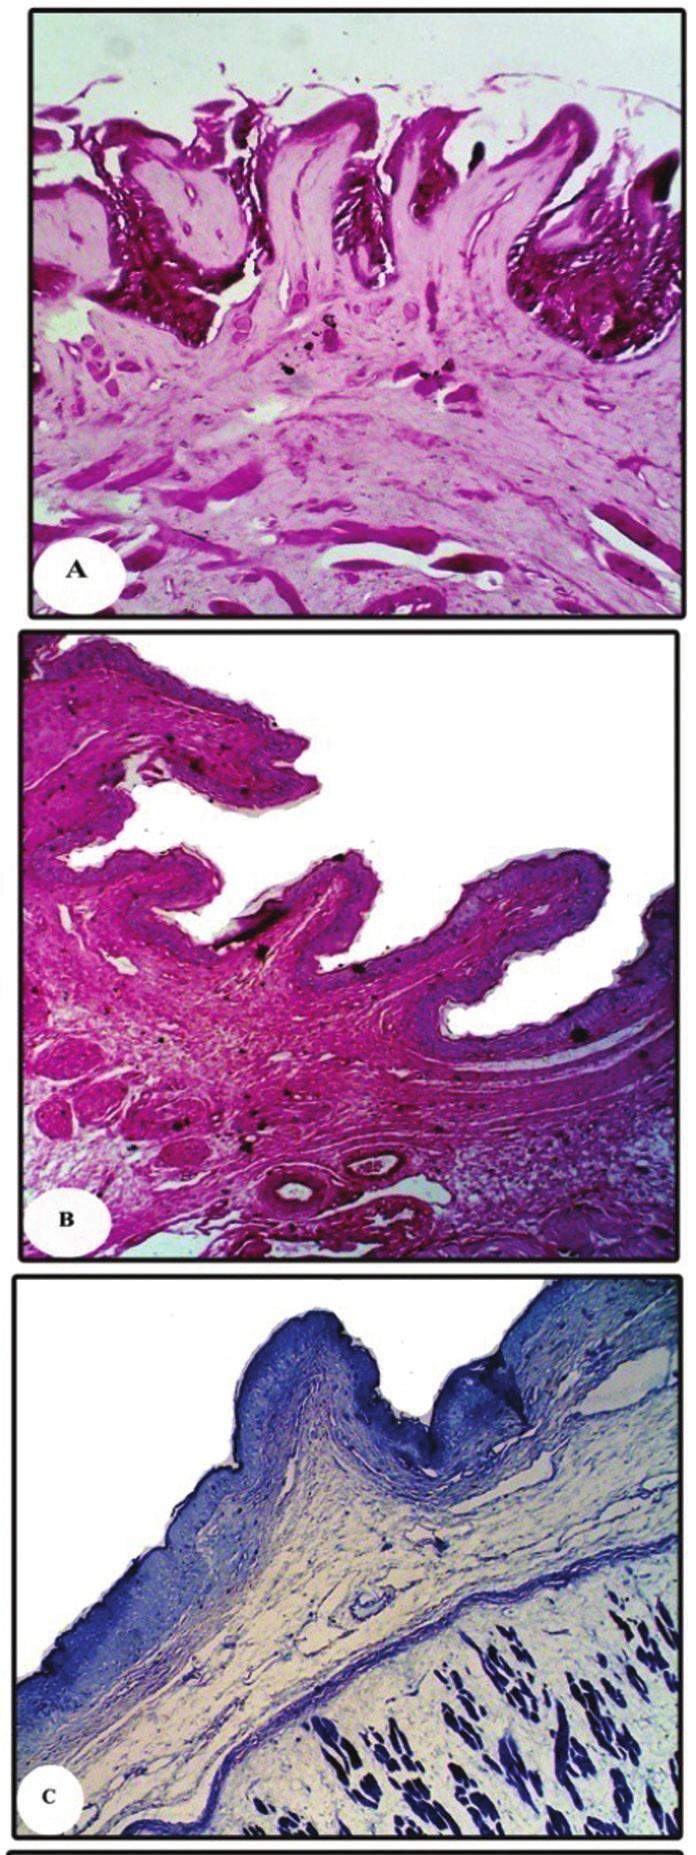 A.M. El-Bakry, H. Hamdi, Fine structure of the dorsal lingual epithelium in T. annularis and C. niloticus Figure 5.